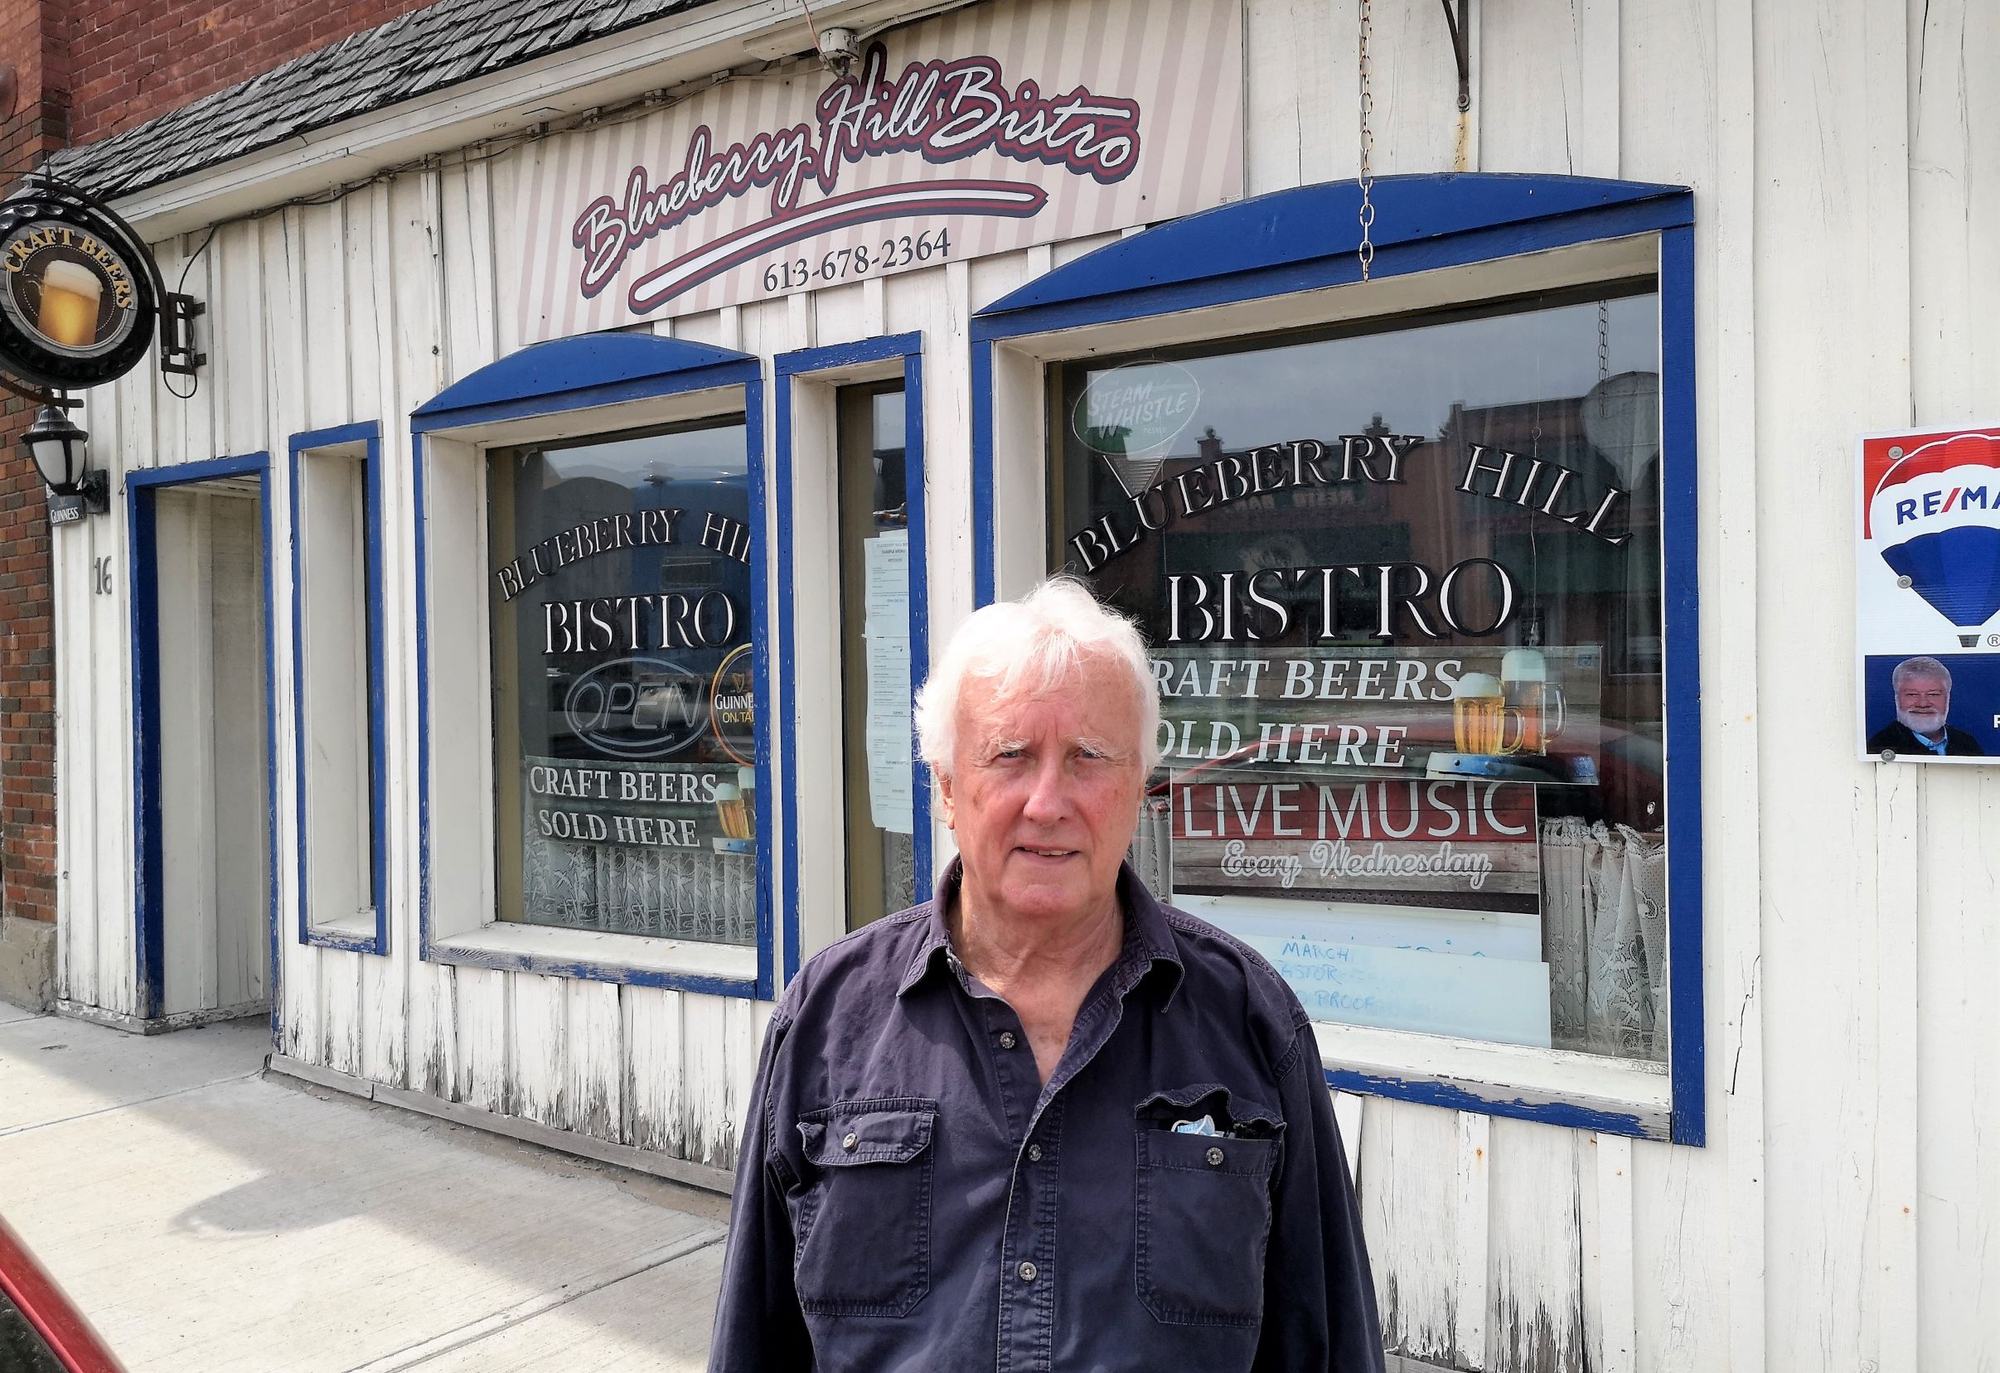 Music could return to Blueberry Hill Bistro once new ownership is found